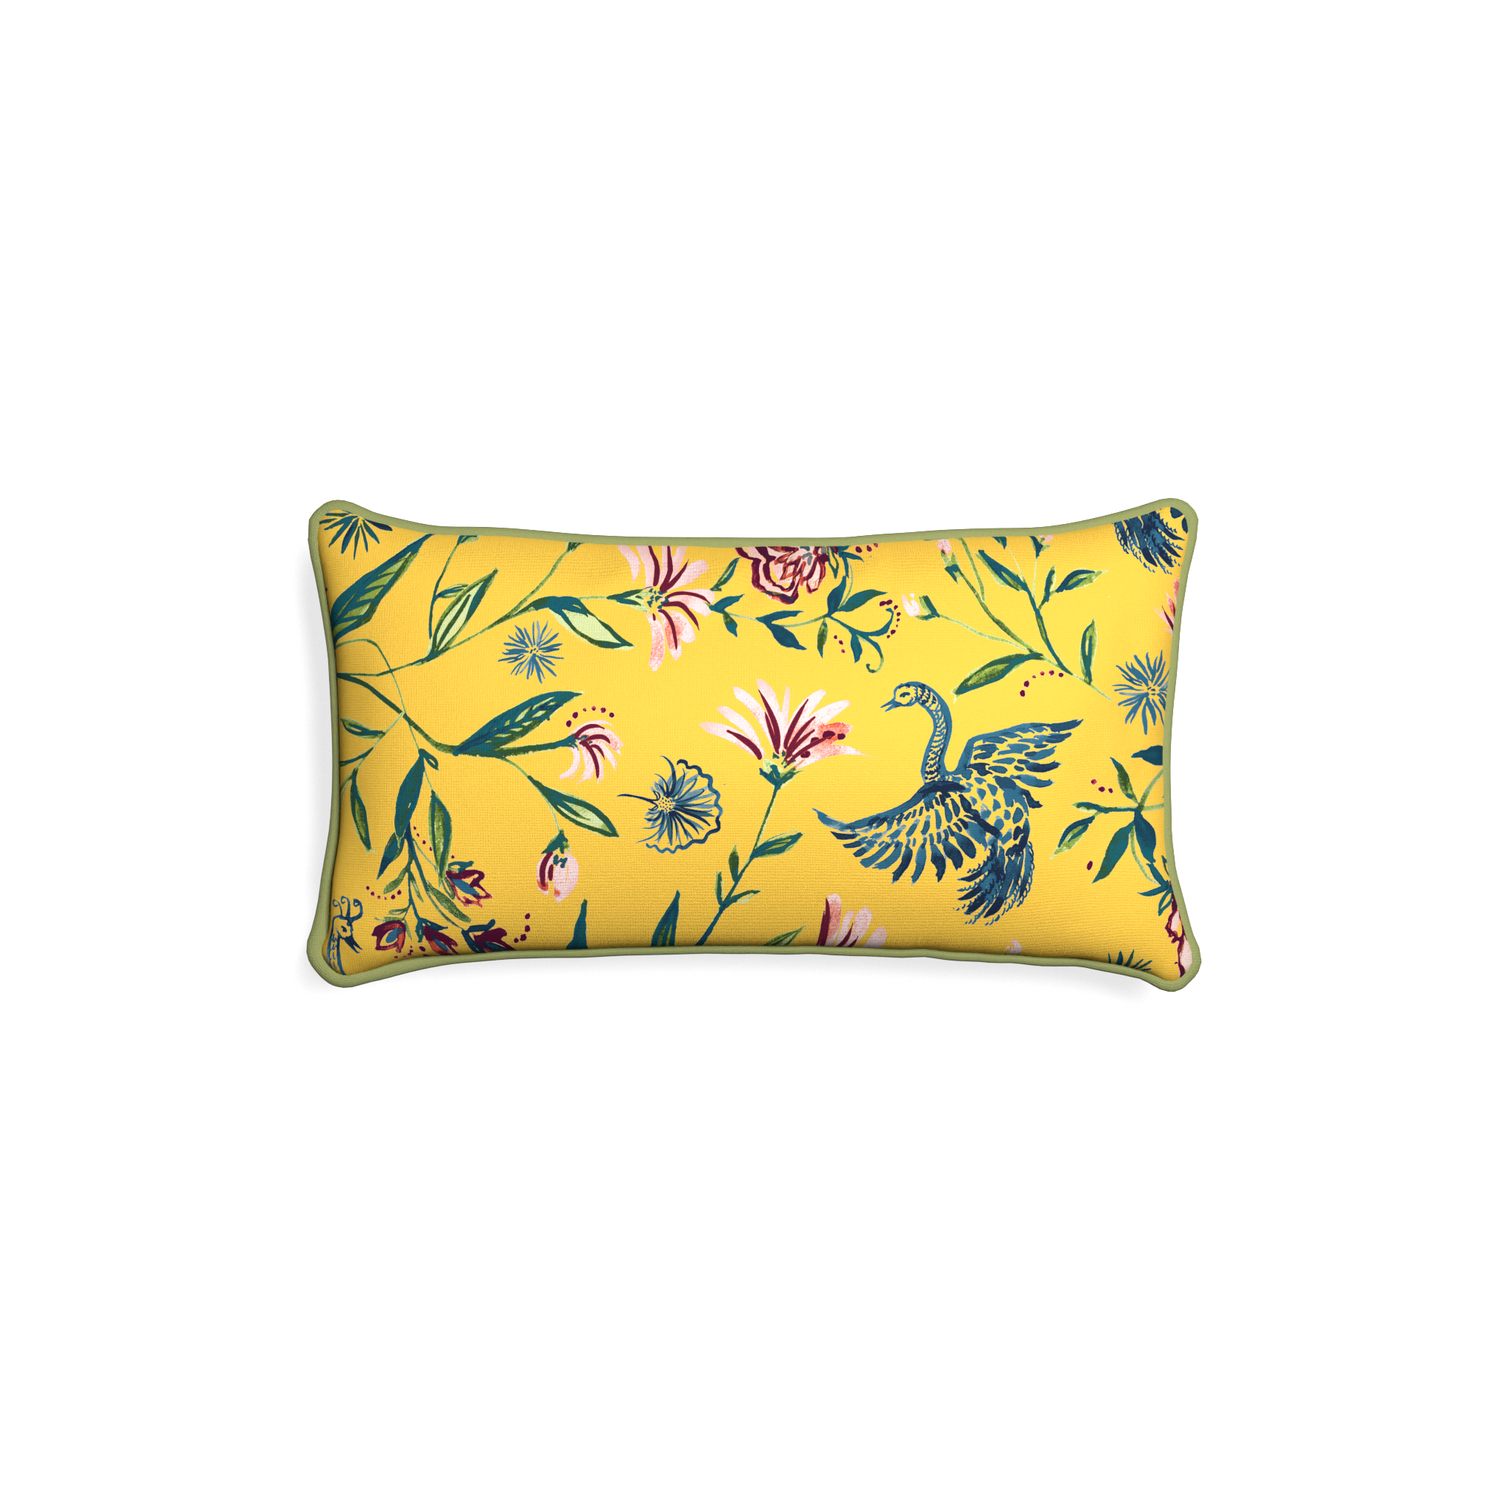 Petite-lumbar daphne canary custom yellow chinoiseriepillow with moss piping on white background